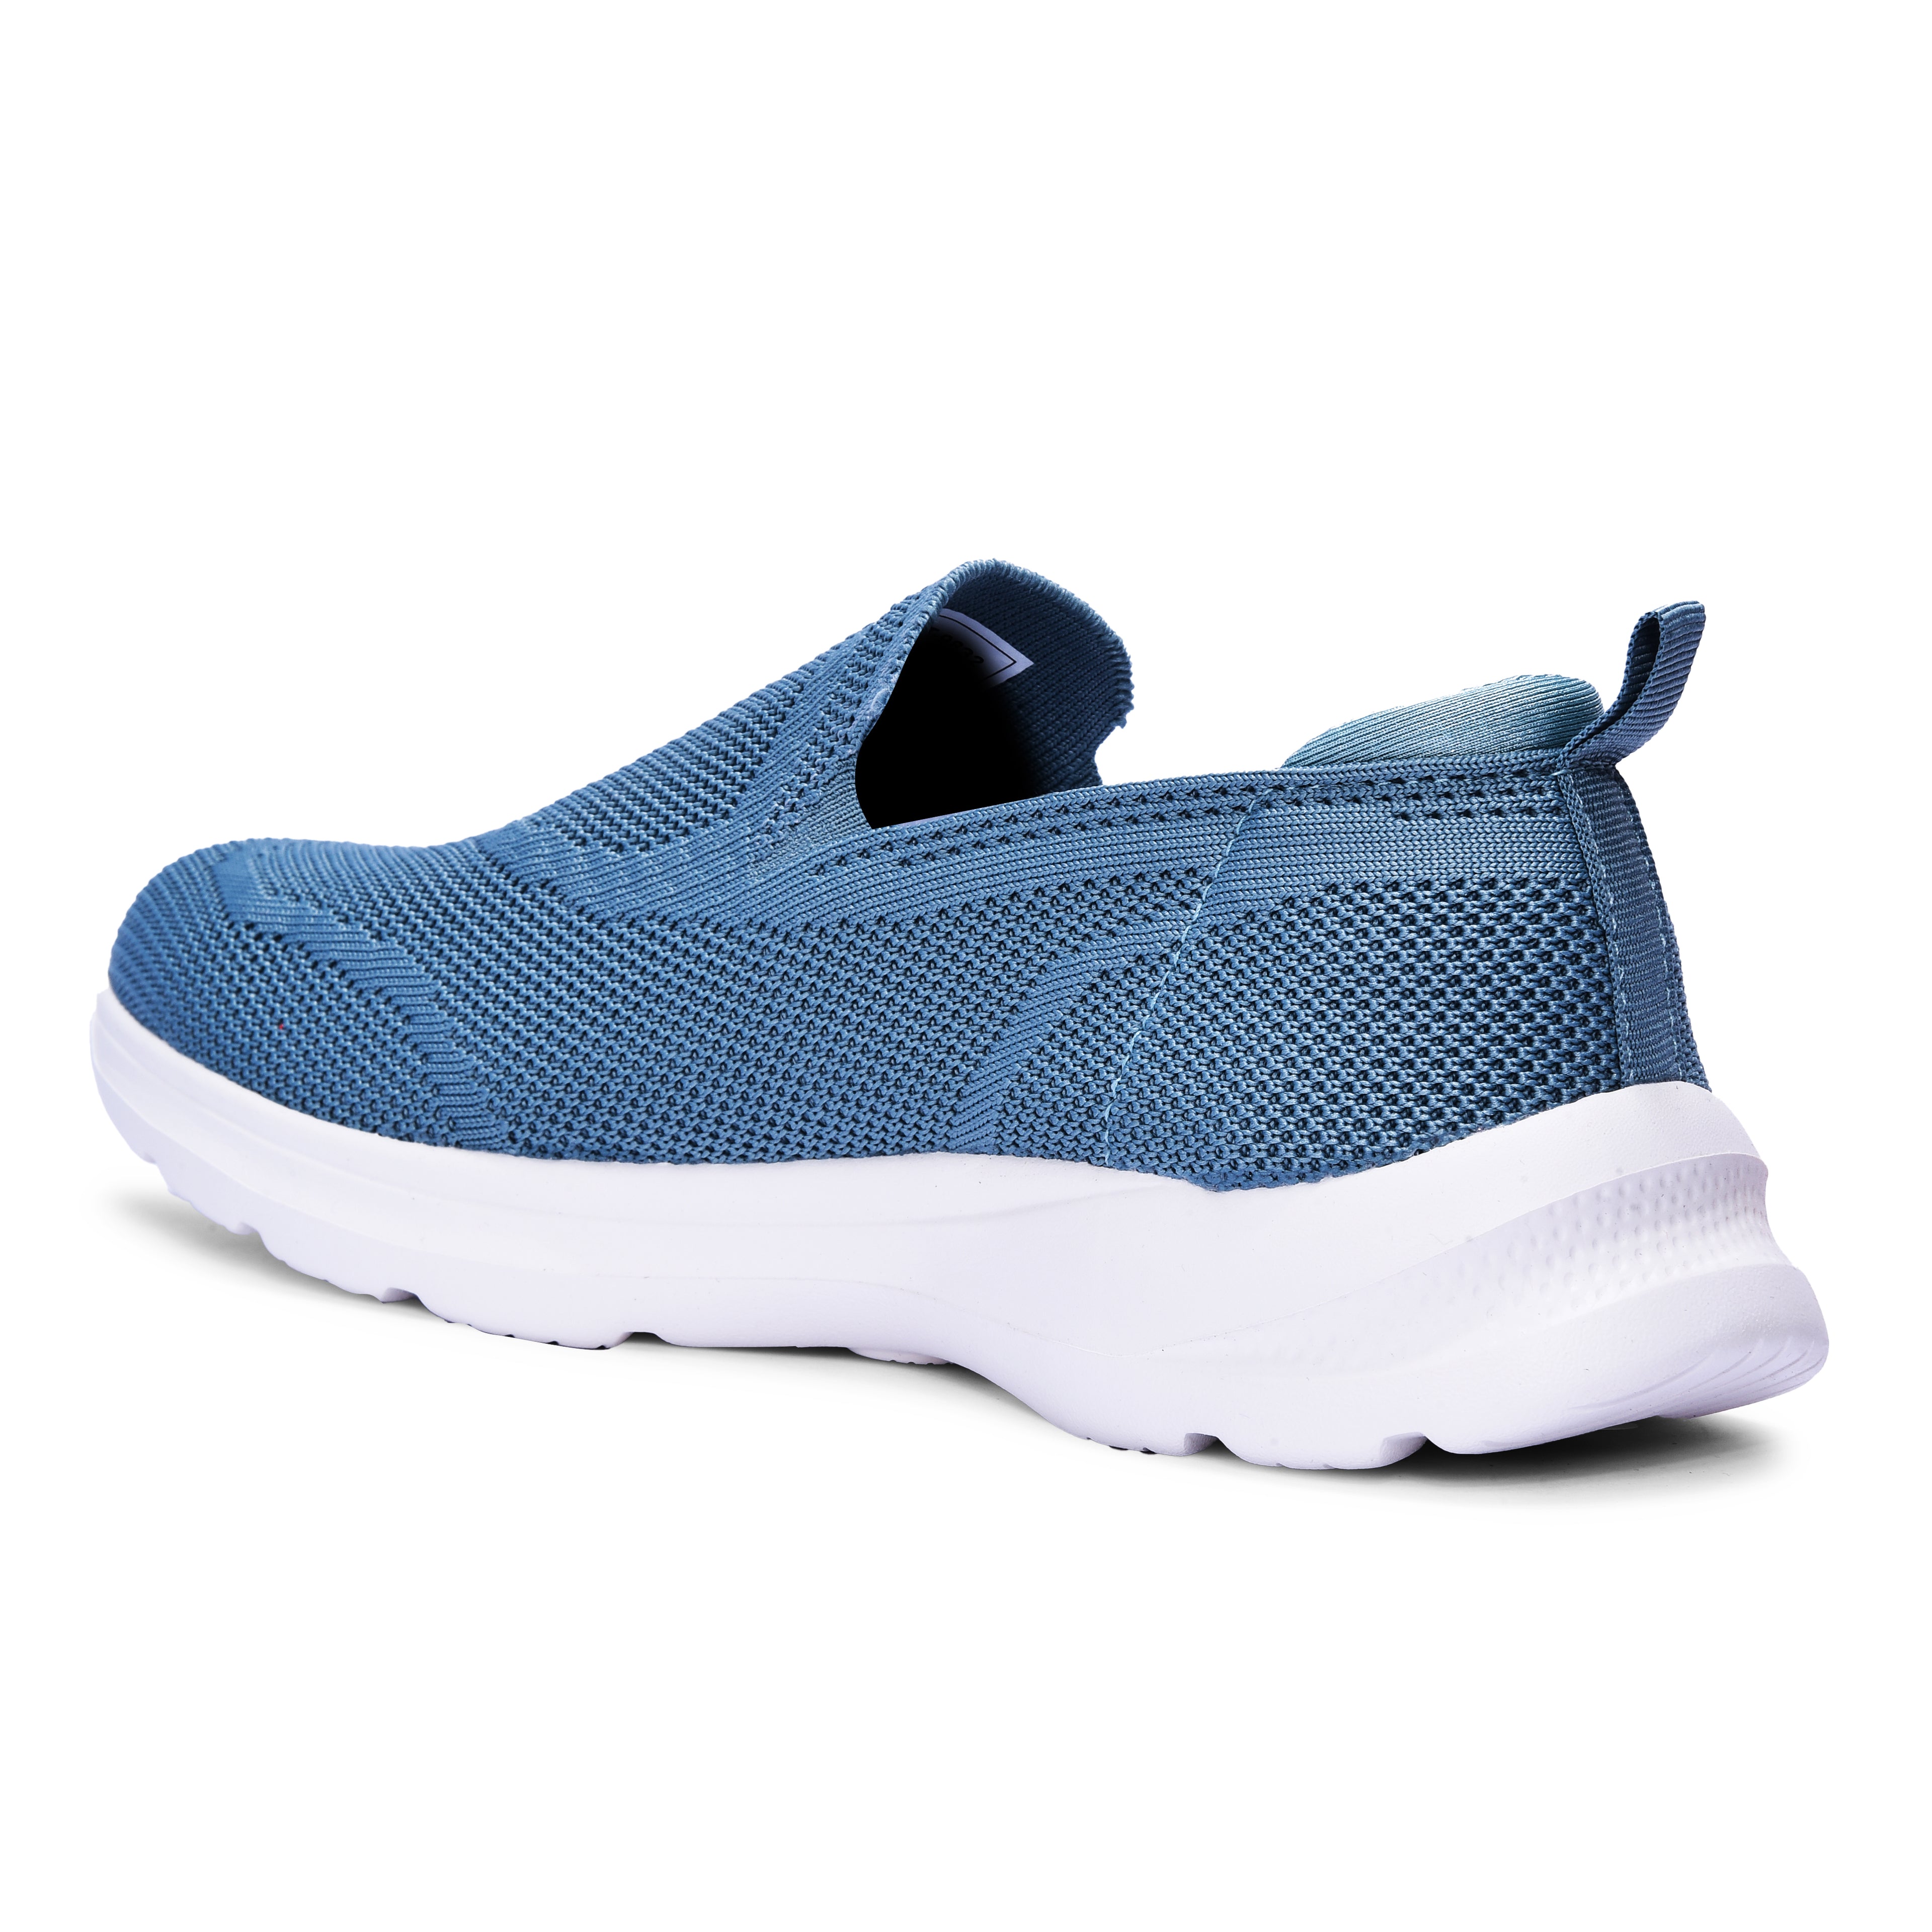 Calcetto CLT-9832 Blue Orchid Casual Slip On For Women